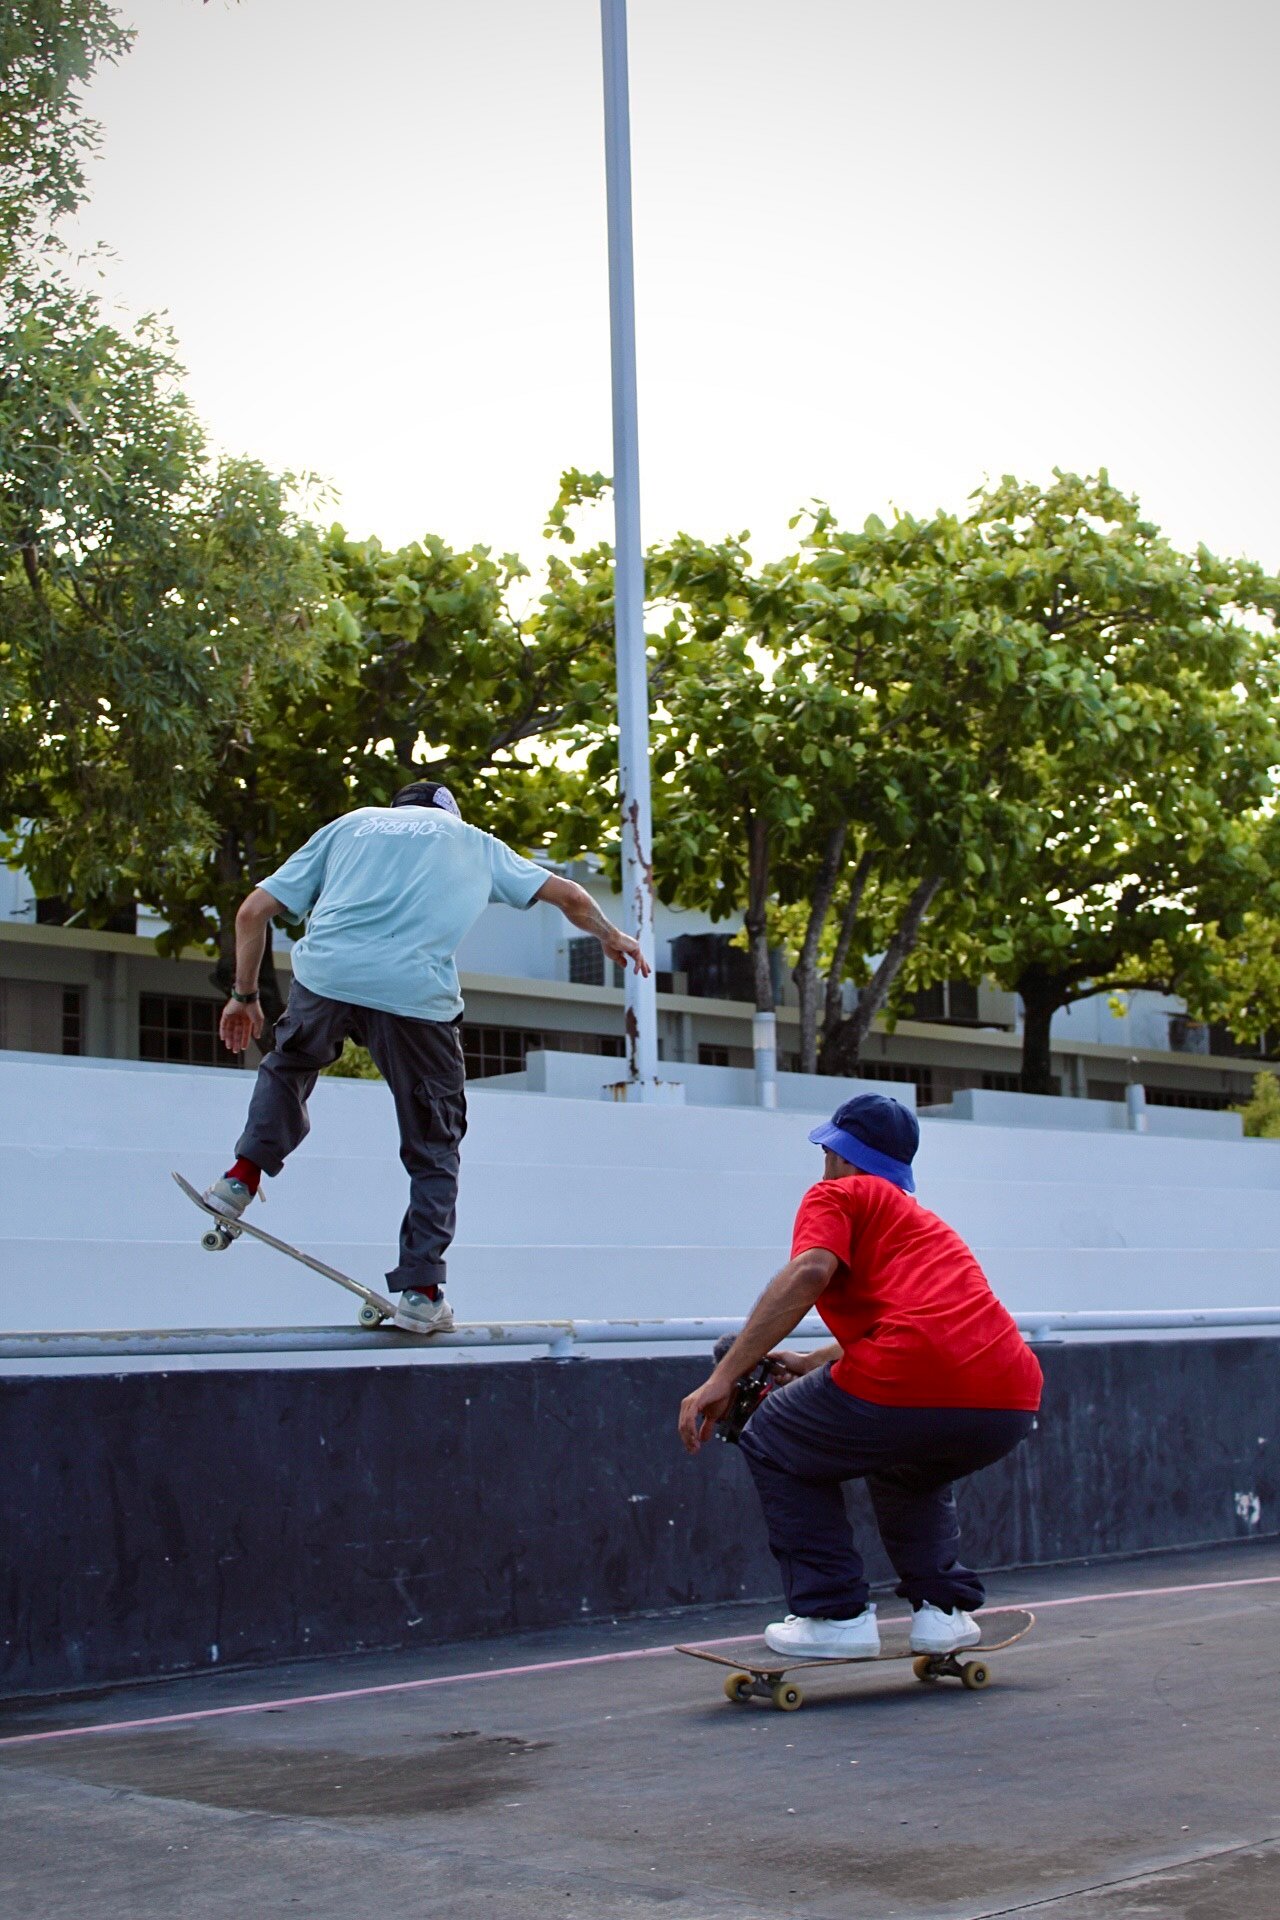 Fico Rodz Crook pop over getting filmed by Luis Diaz while filming for our new video which is coming out august 18. Shot by Adimarys Rivera